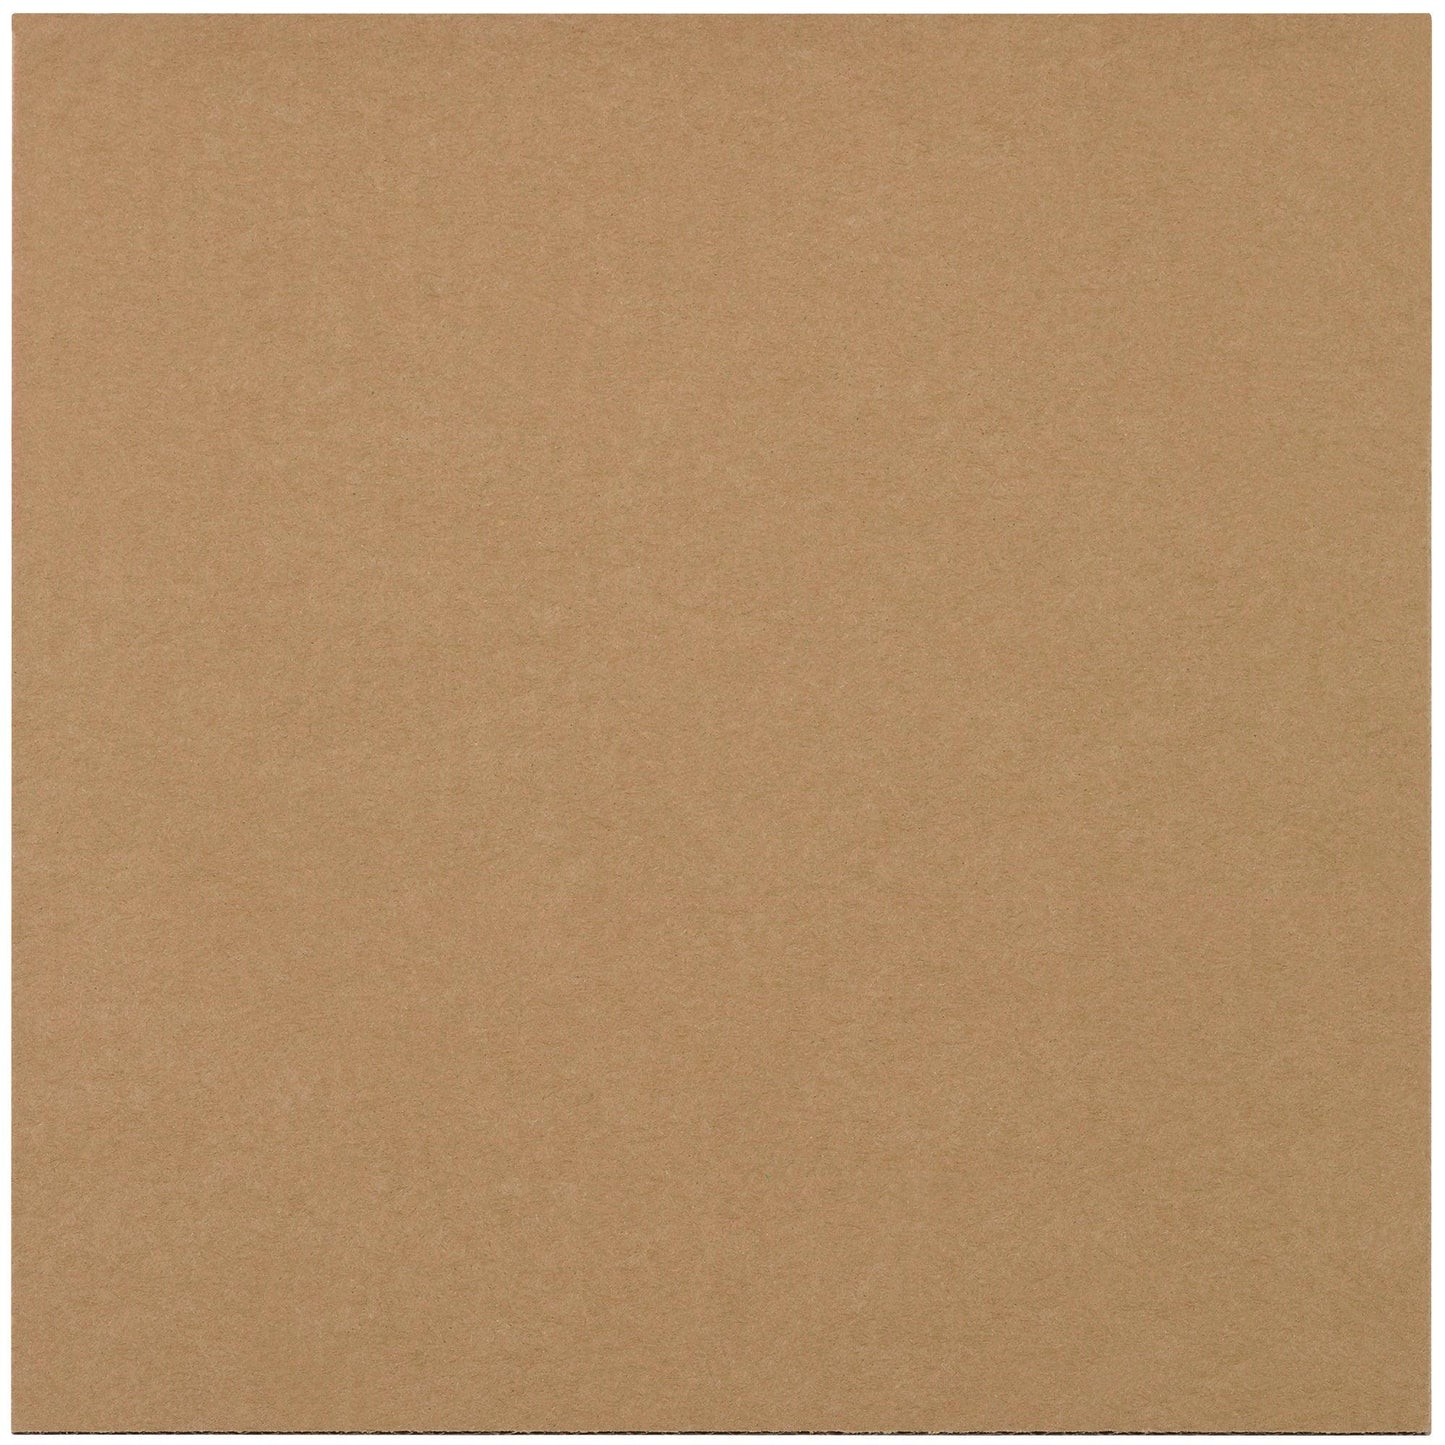 13 7/8 x 13 7/8" Corrugated Layer Pads - SP13